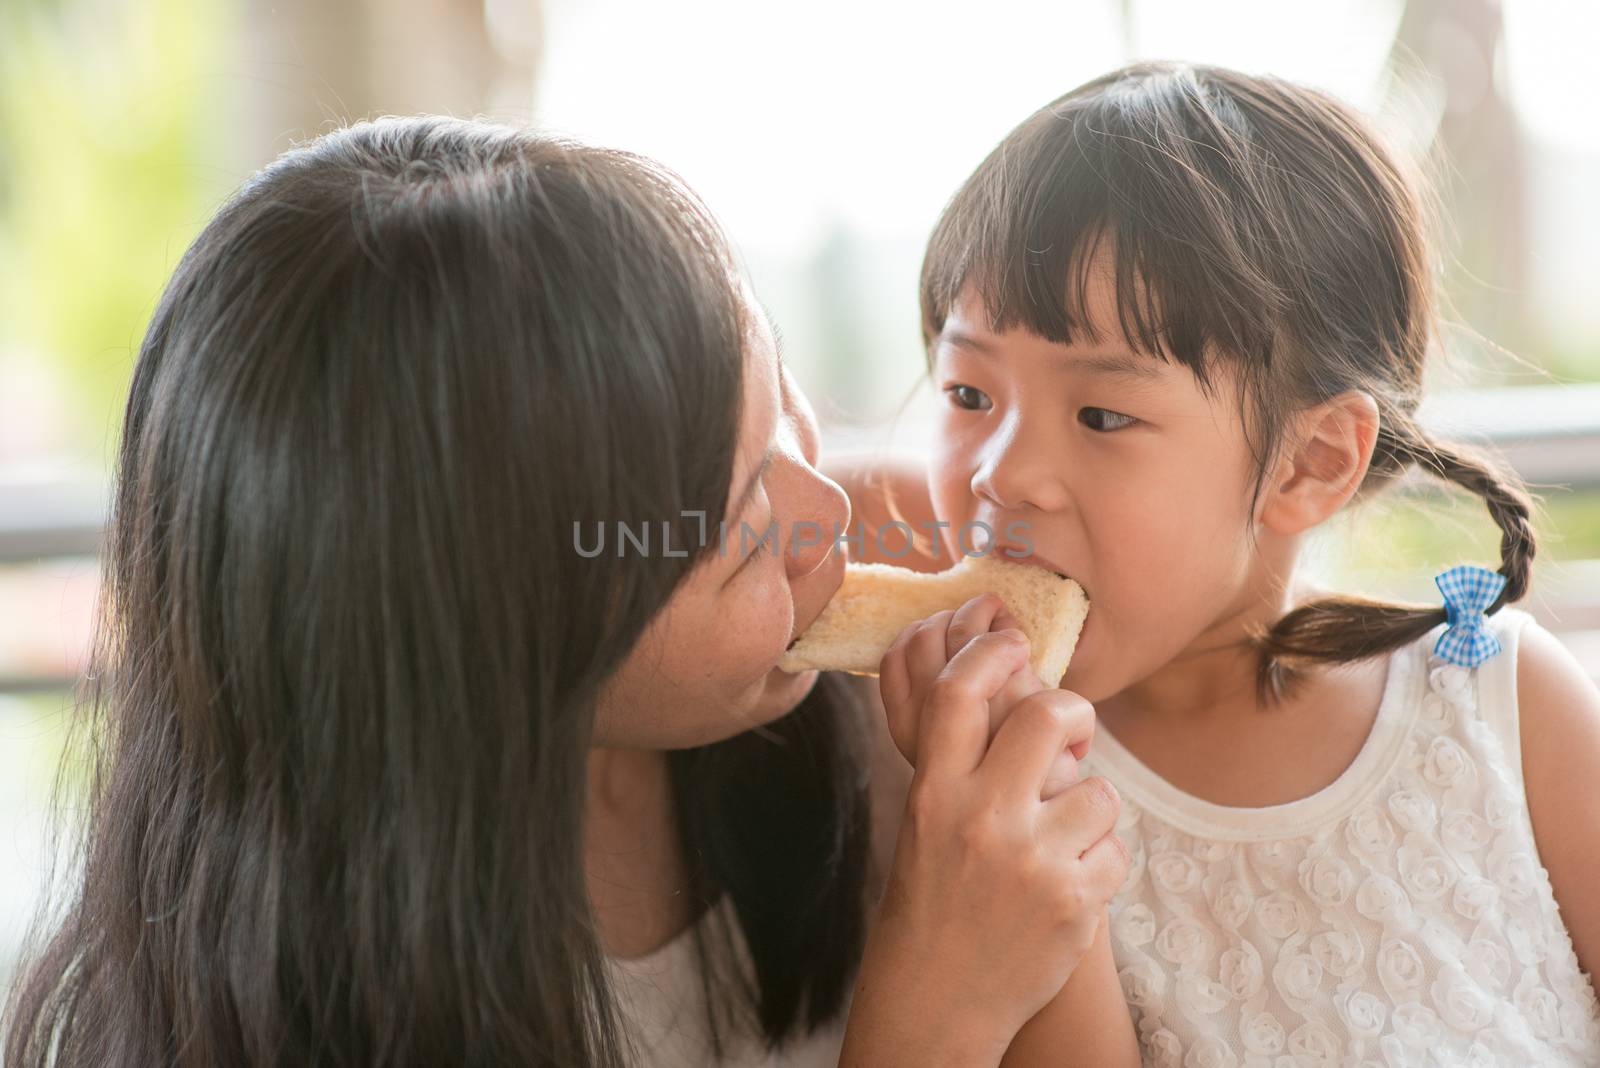 Adorable Asian child eating and sharing butter toast with mom at cafe. Outdoor family lifestyle with natural light.